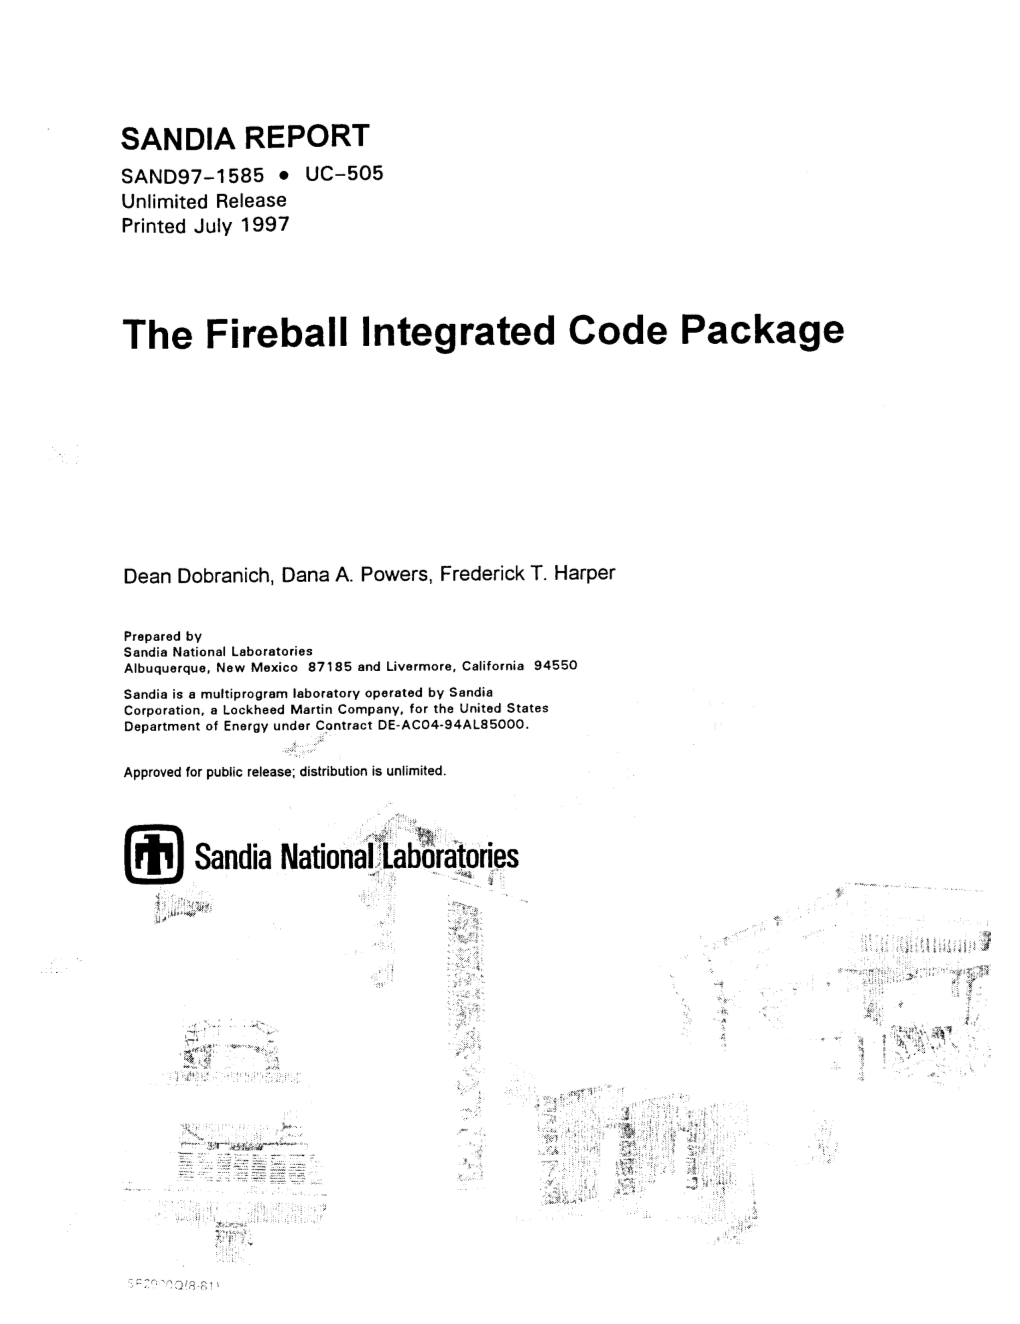 The Fireball Integrated Code Package